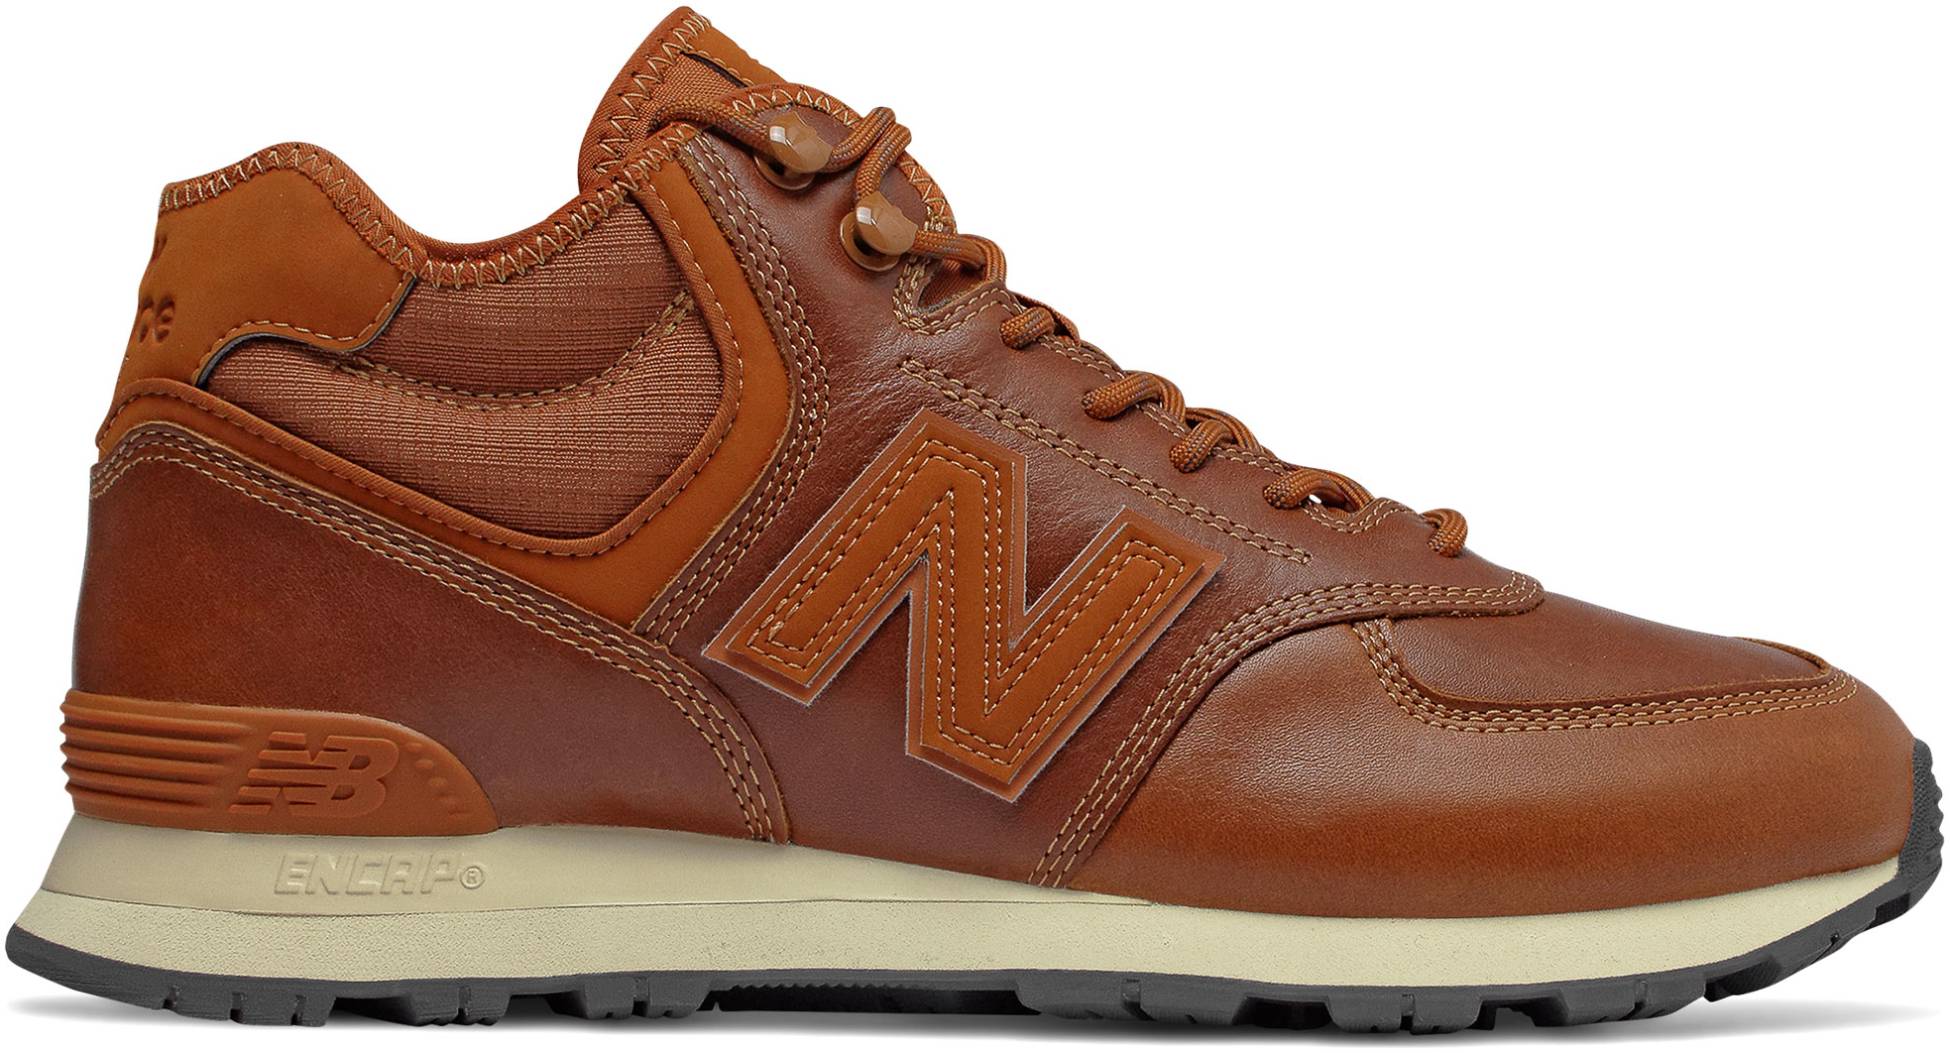 new balance shoes leather